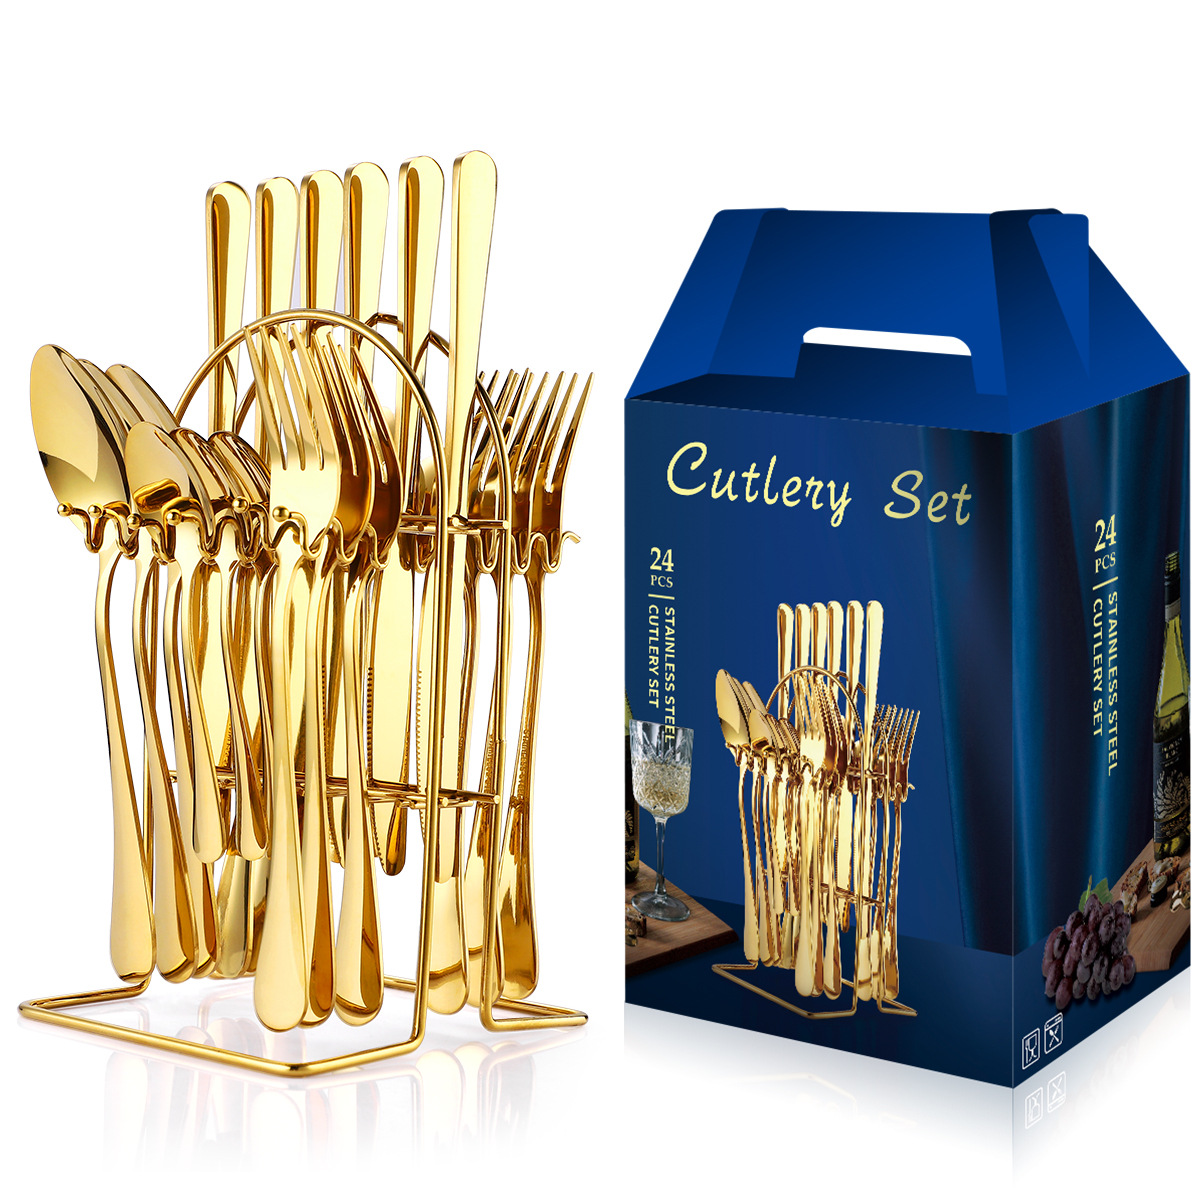 cutlery set 24-piece cutlery set wooden box stainless steel cutlery set knife, fork and spoon four main piece hanger